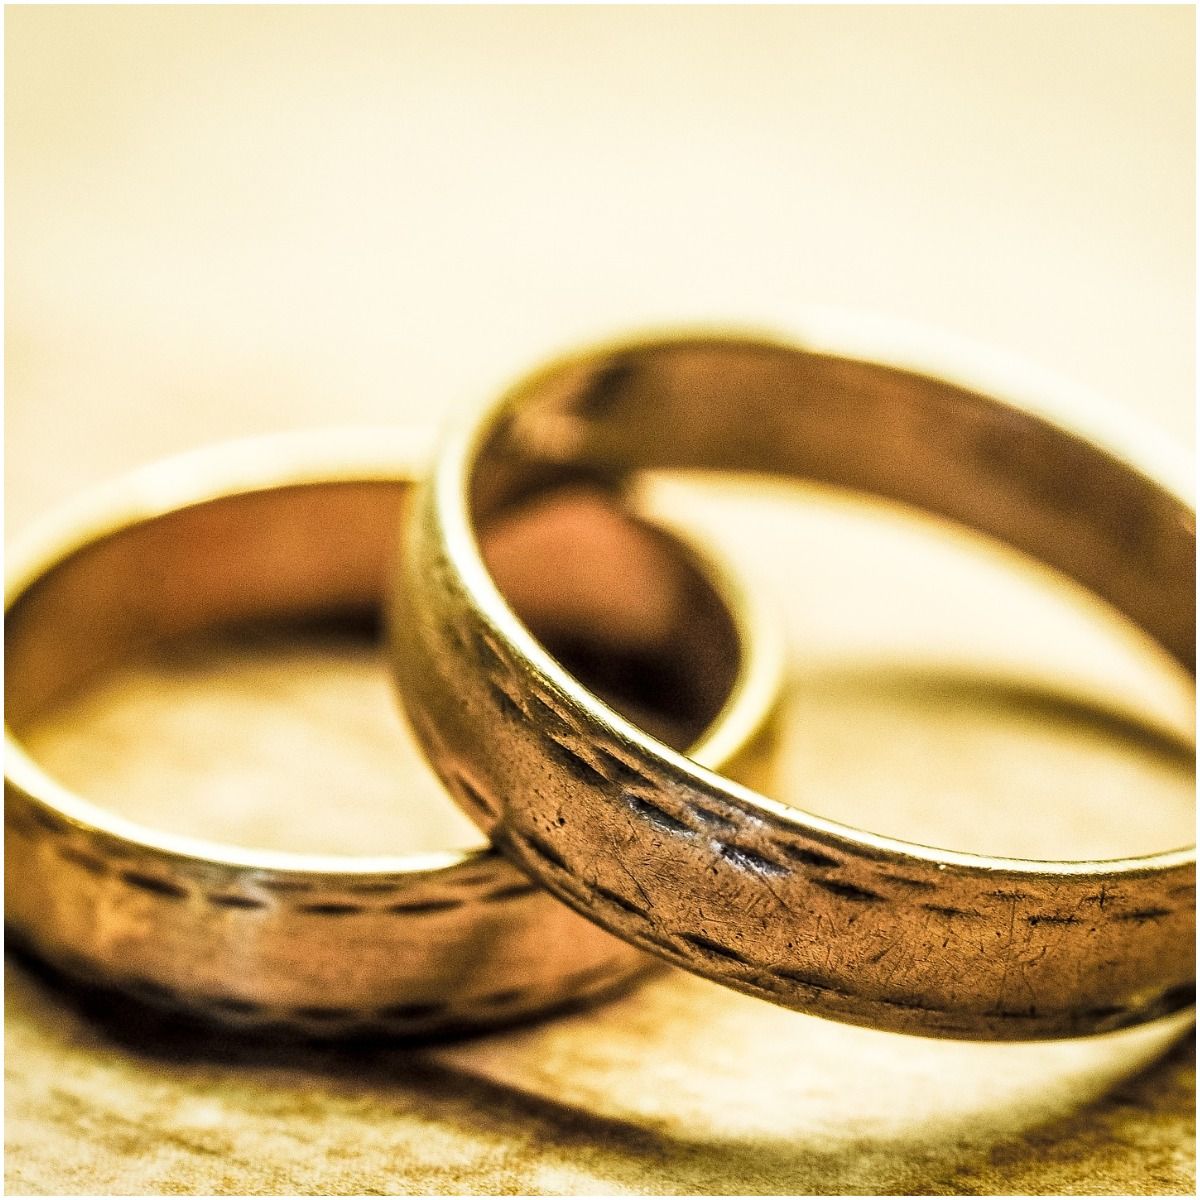 What is the spiritual meaning of finding a gold ring